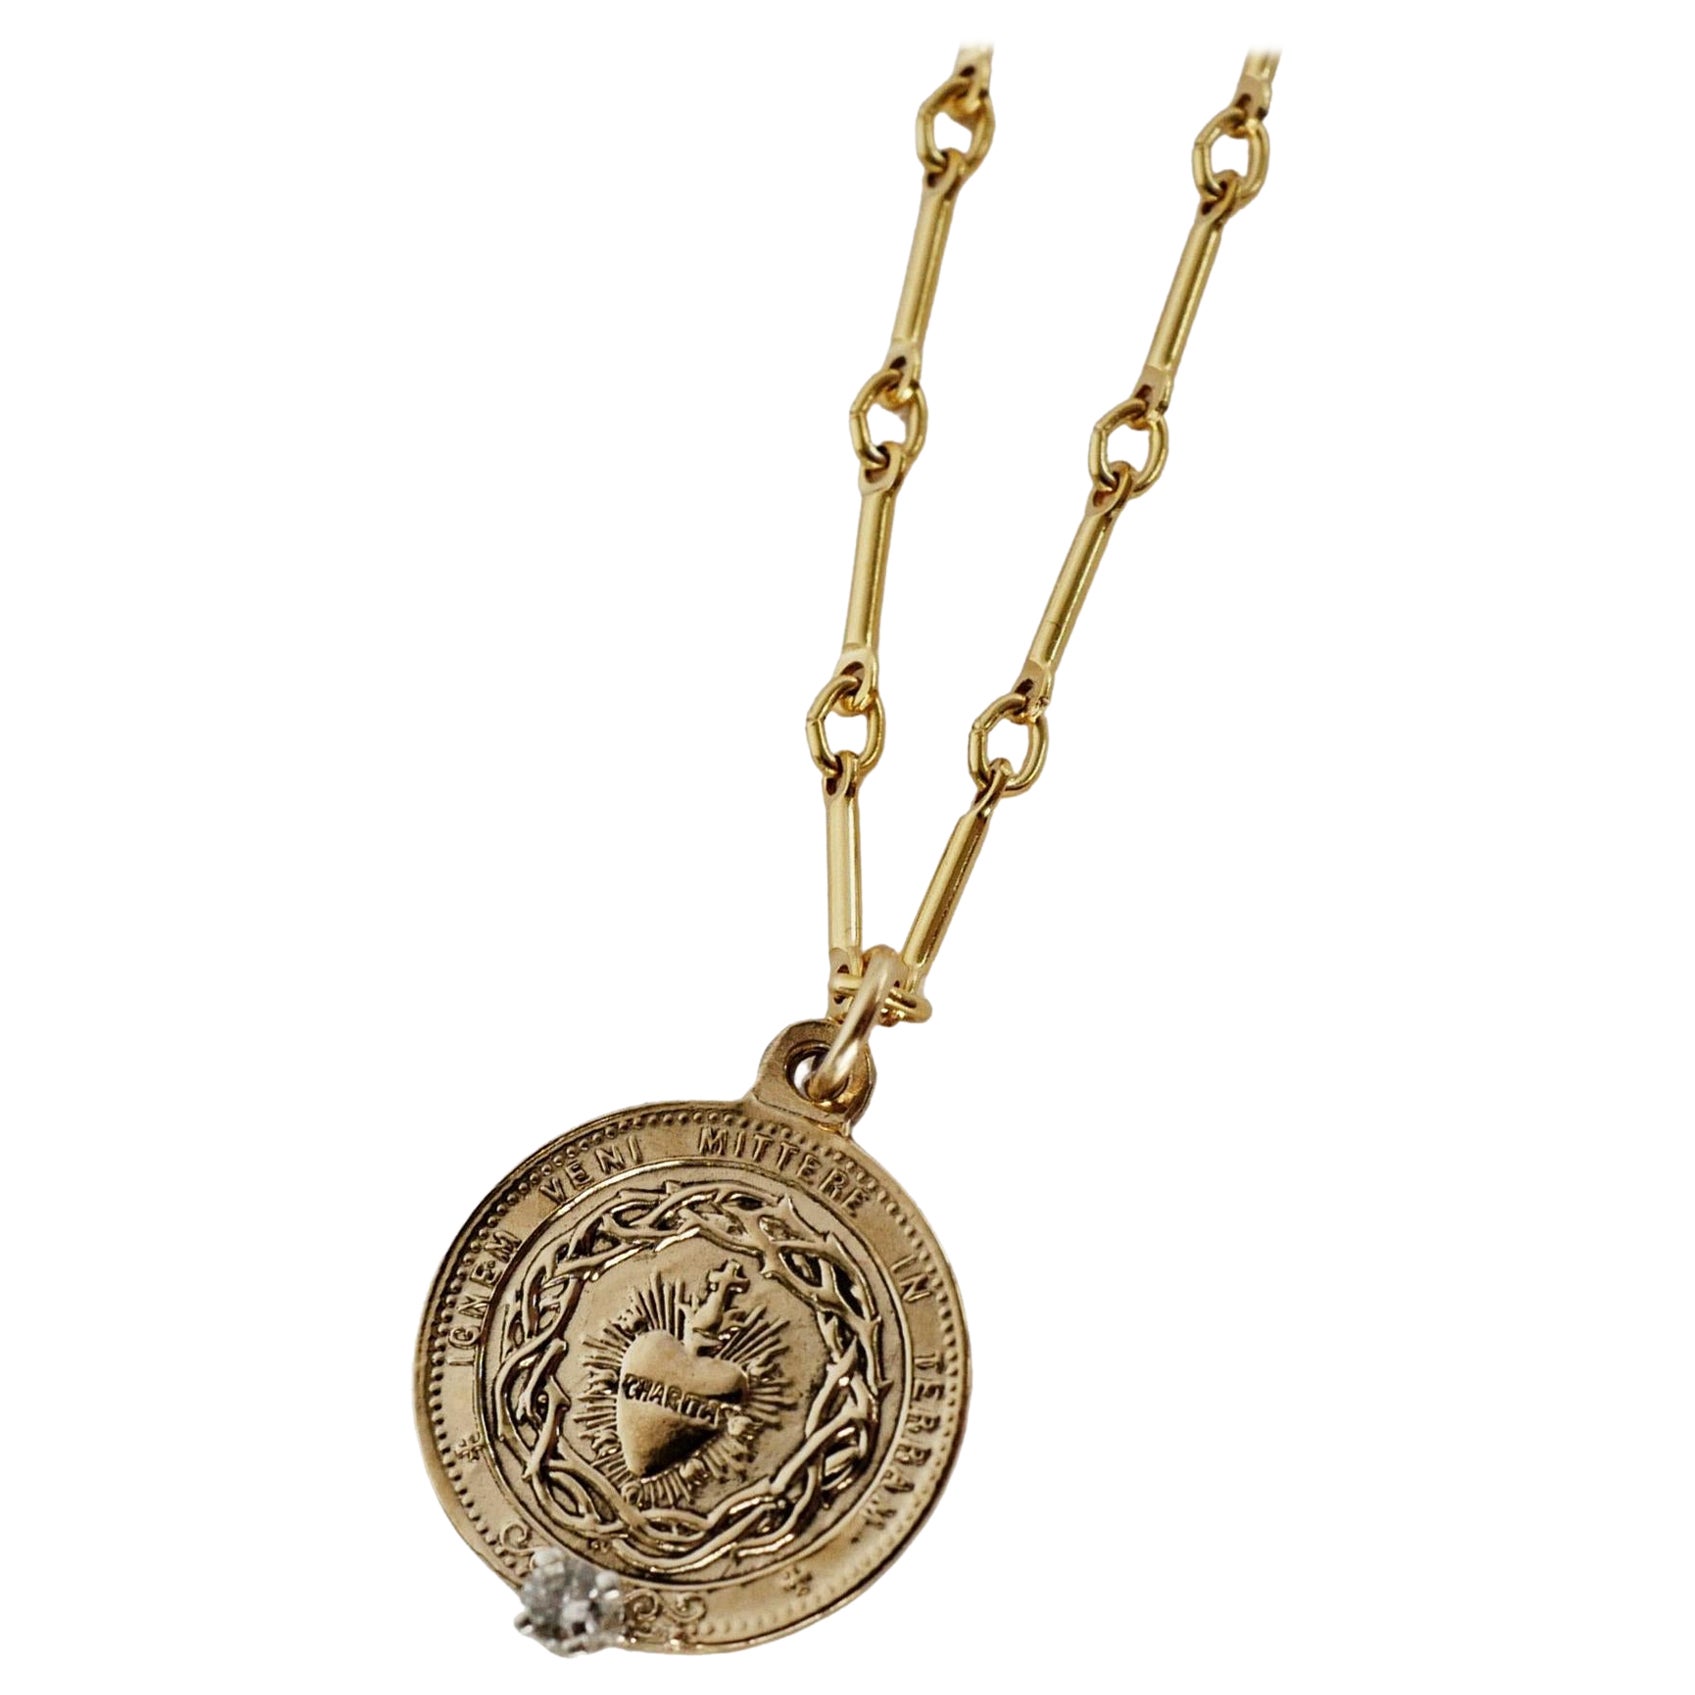 White Diamond Sacred Heart Coin Medal Pendant Chain Necklace
Gold Vermeil Pendant and Gold Filled Chain
22